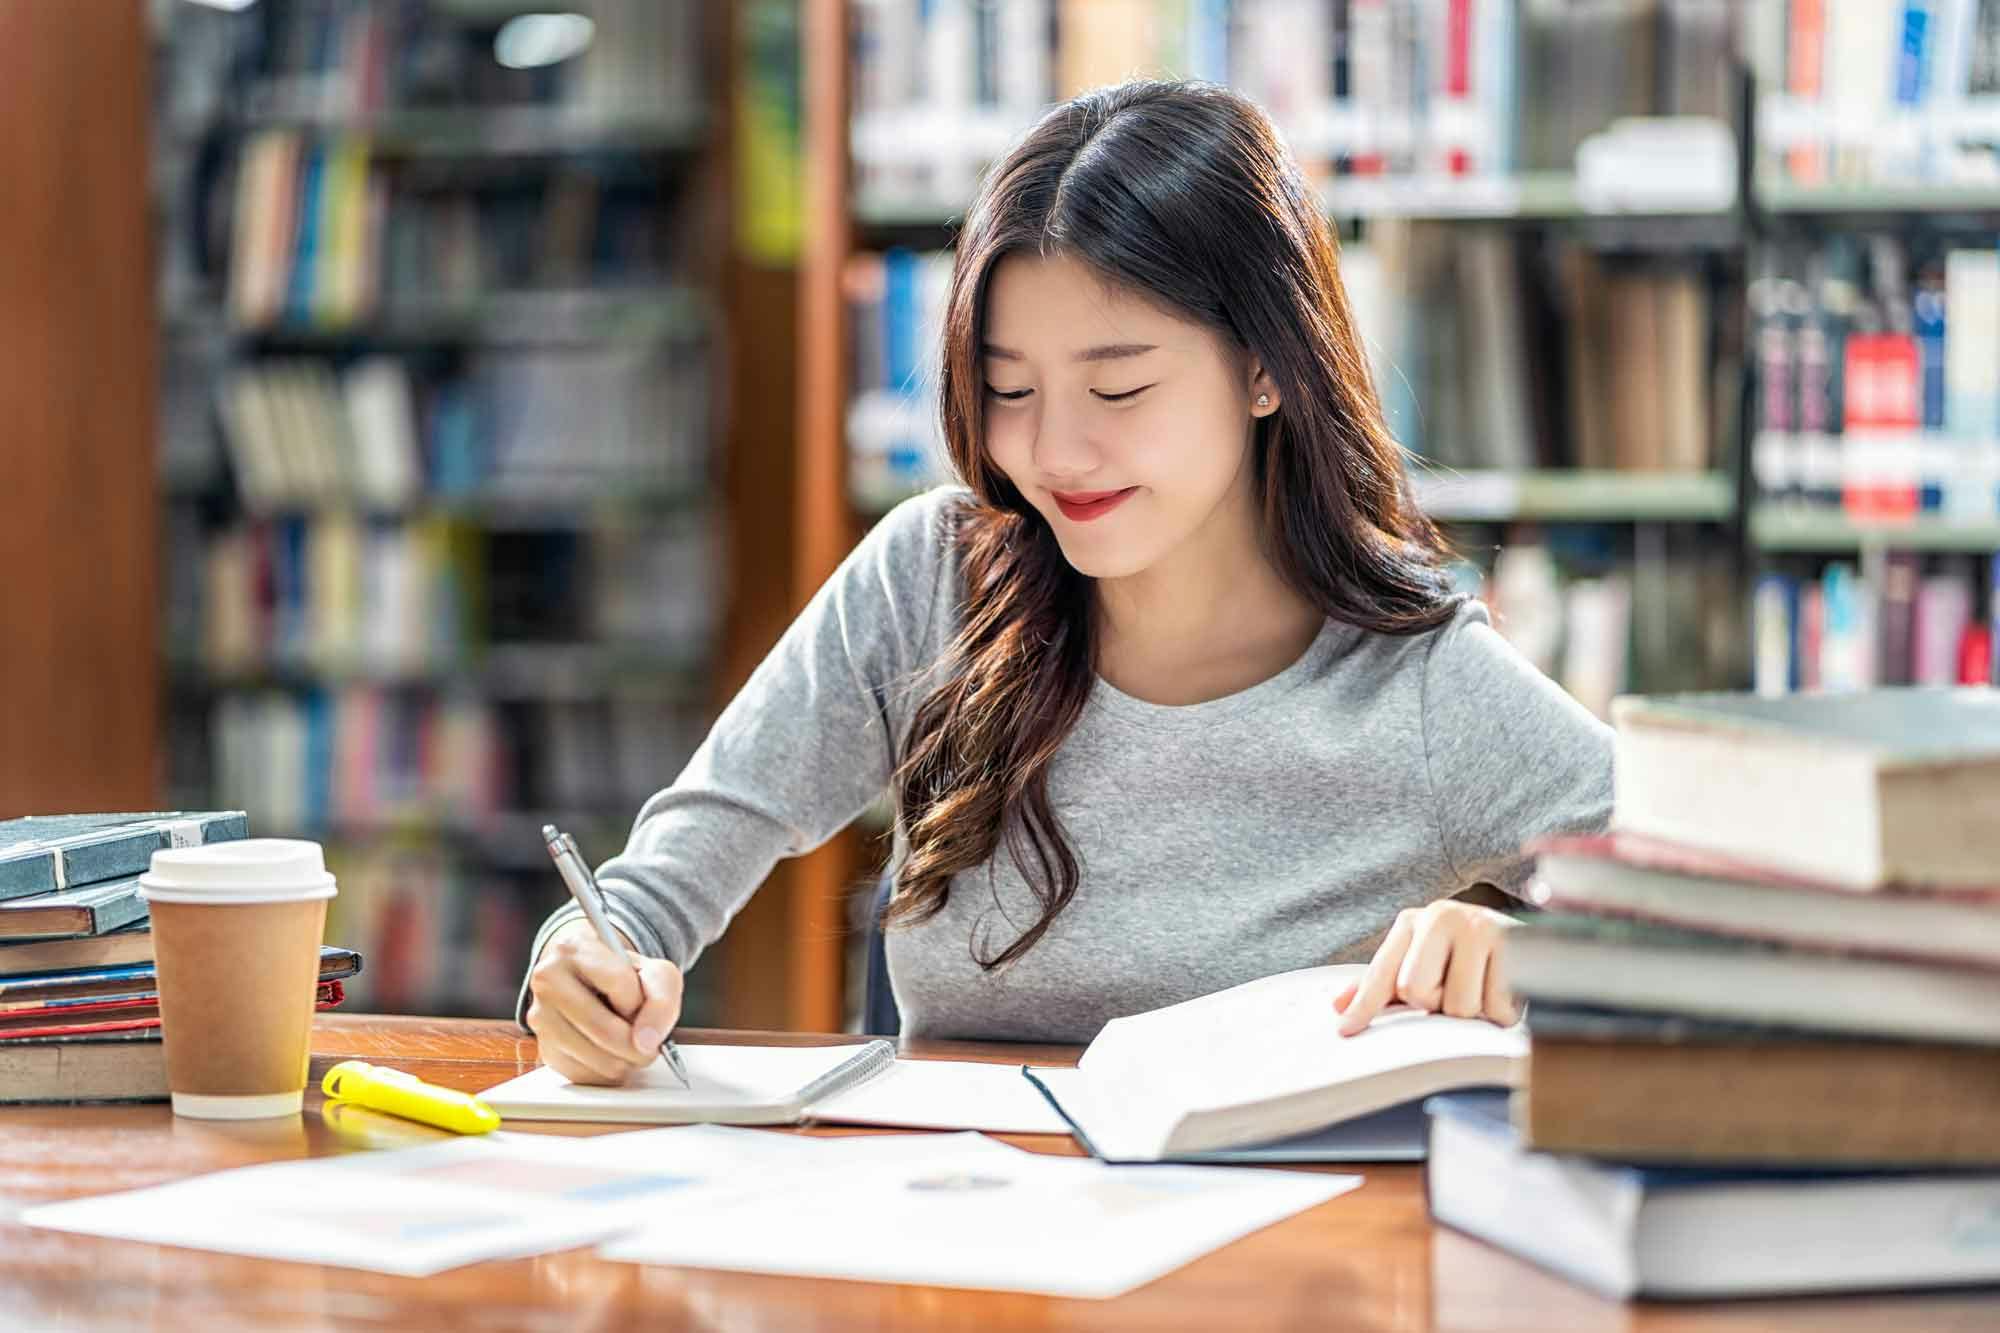 Girl writing and studying in library